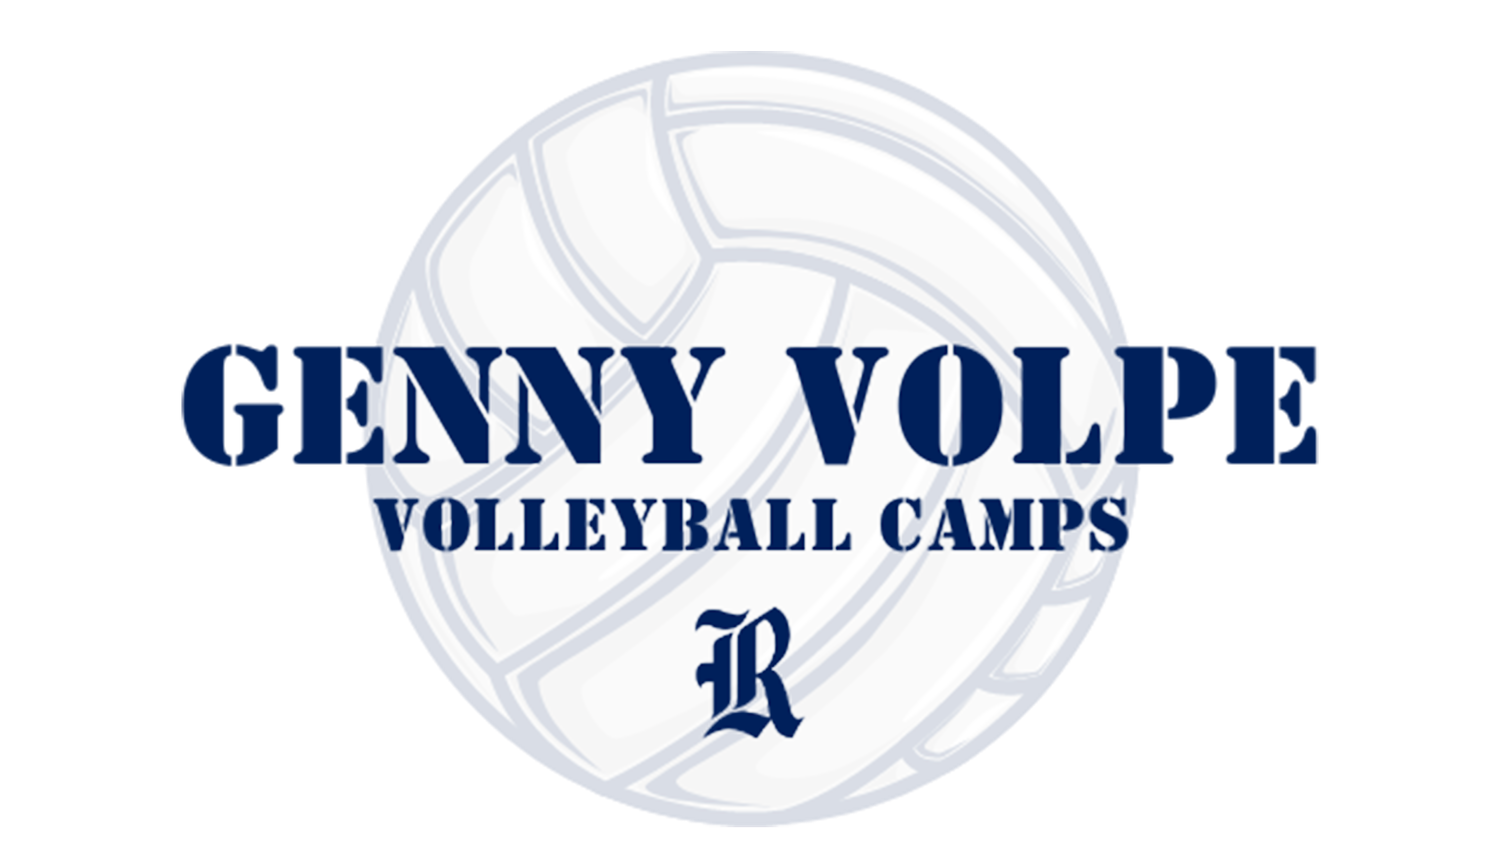 Genny Volpe Volleyball Camps 